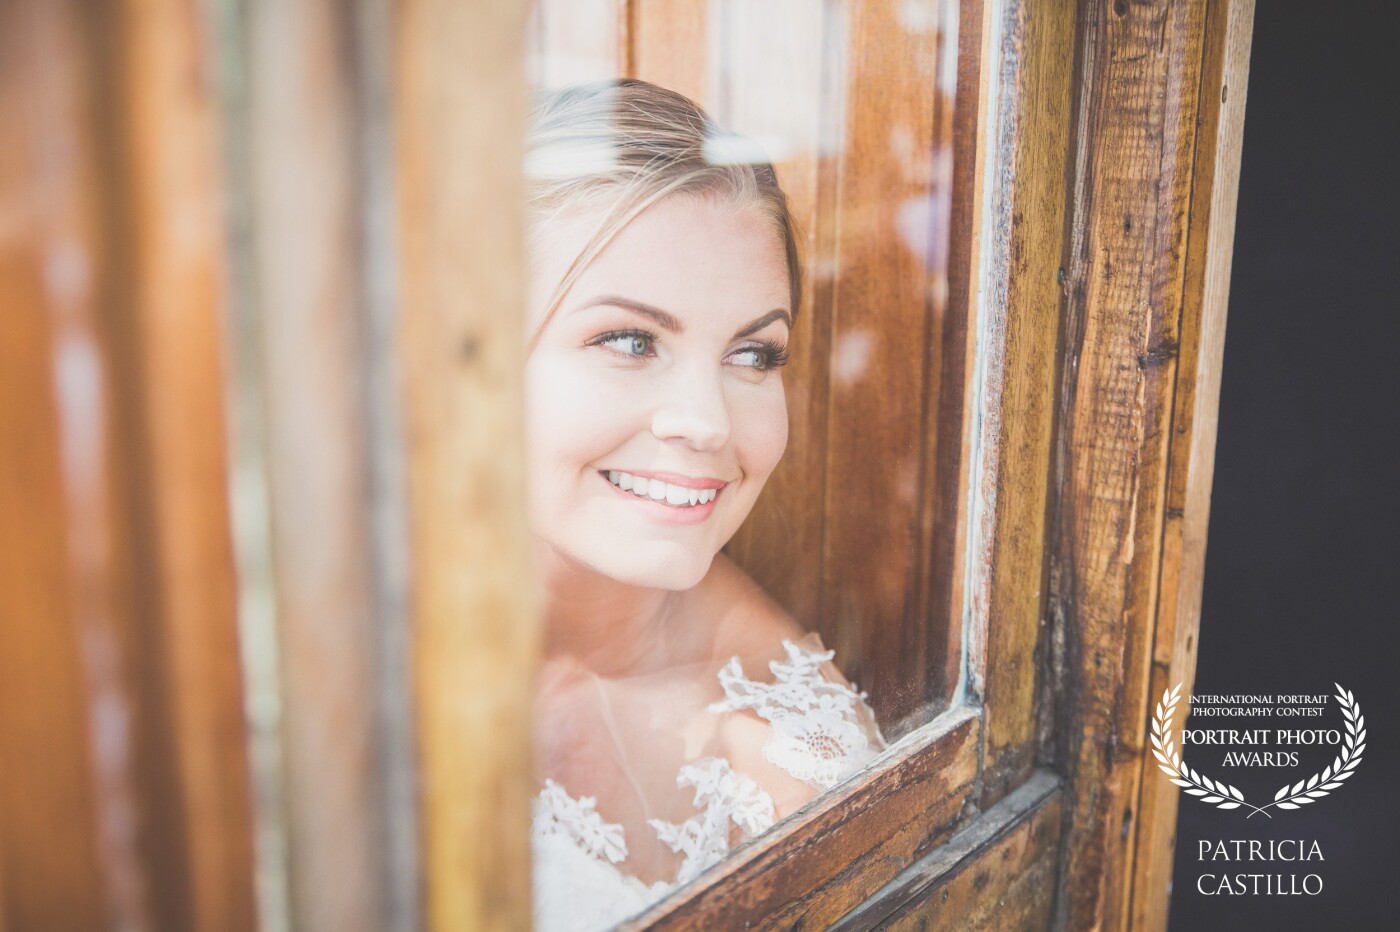 Matilda on her wedding day. This image is taken on an old boat in the archipelago of Stockholm. Matilda was waiting with anxiety her man-to-be: Andreas, trying to hide from his sight behind that mistique old window ... like a little child ... like the most beautiful bride ... 